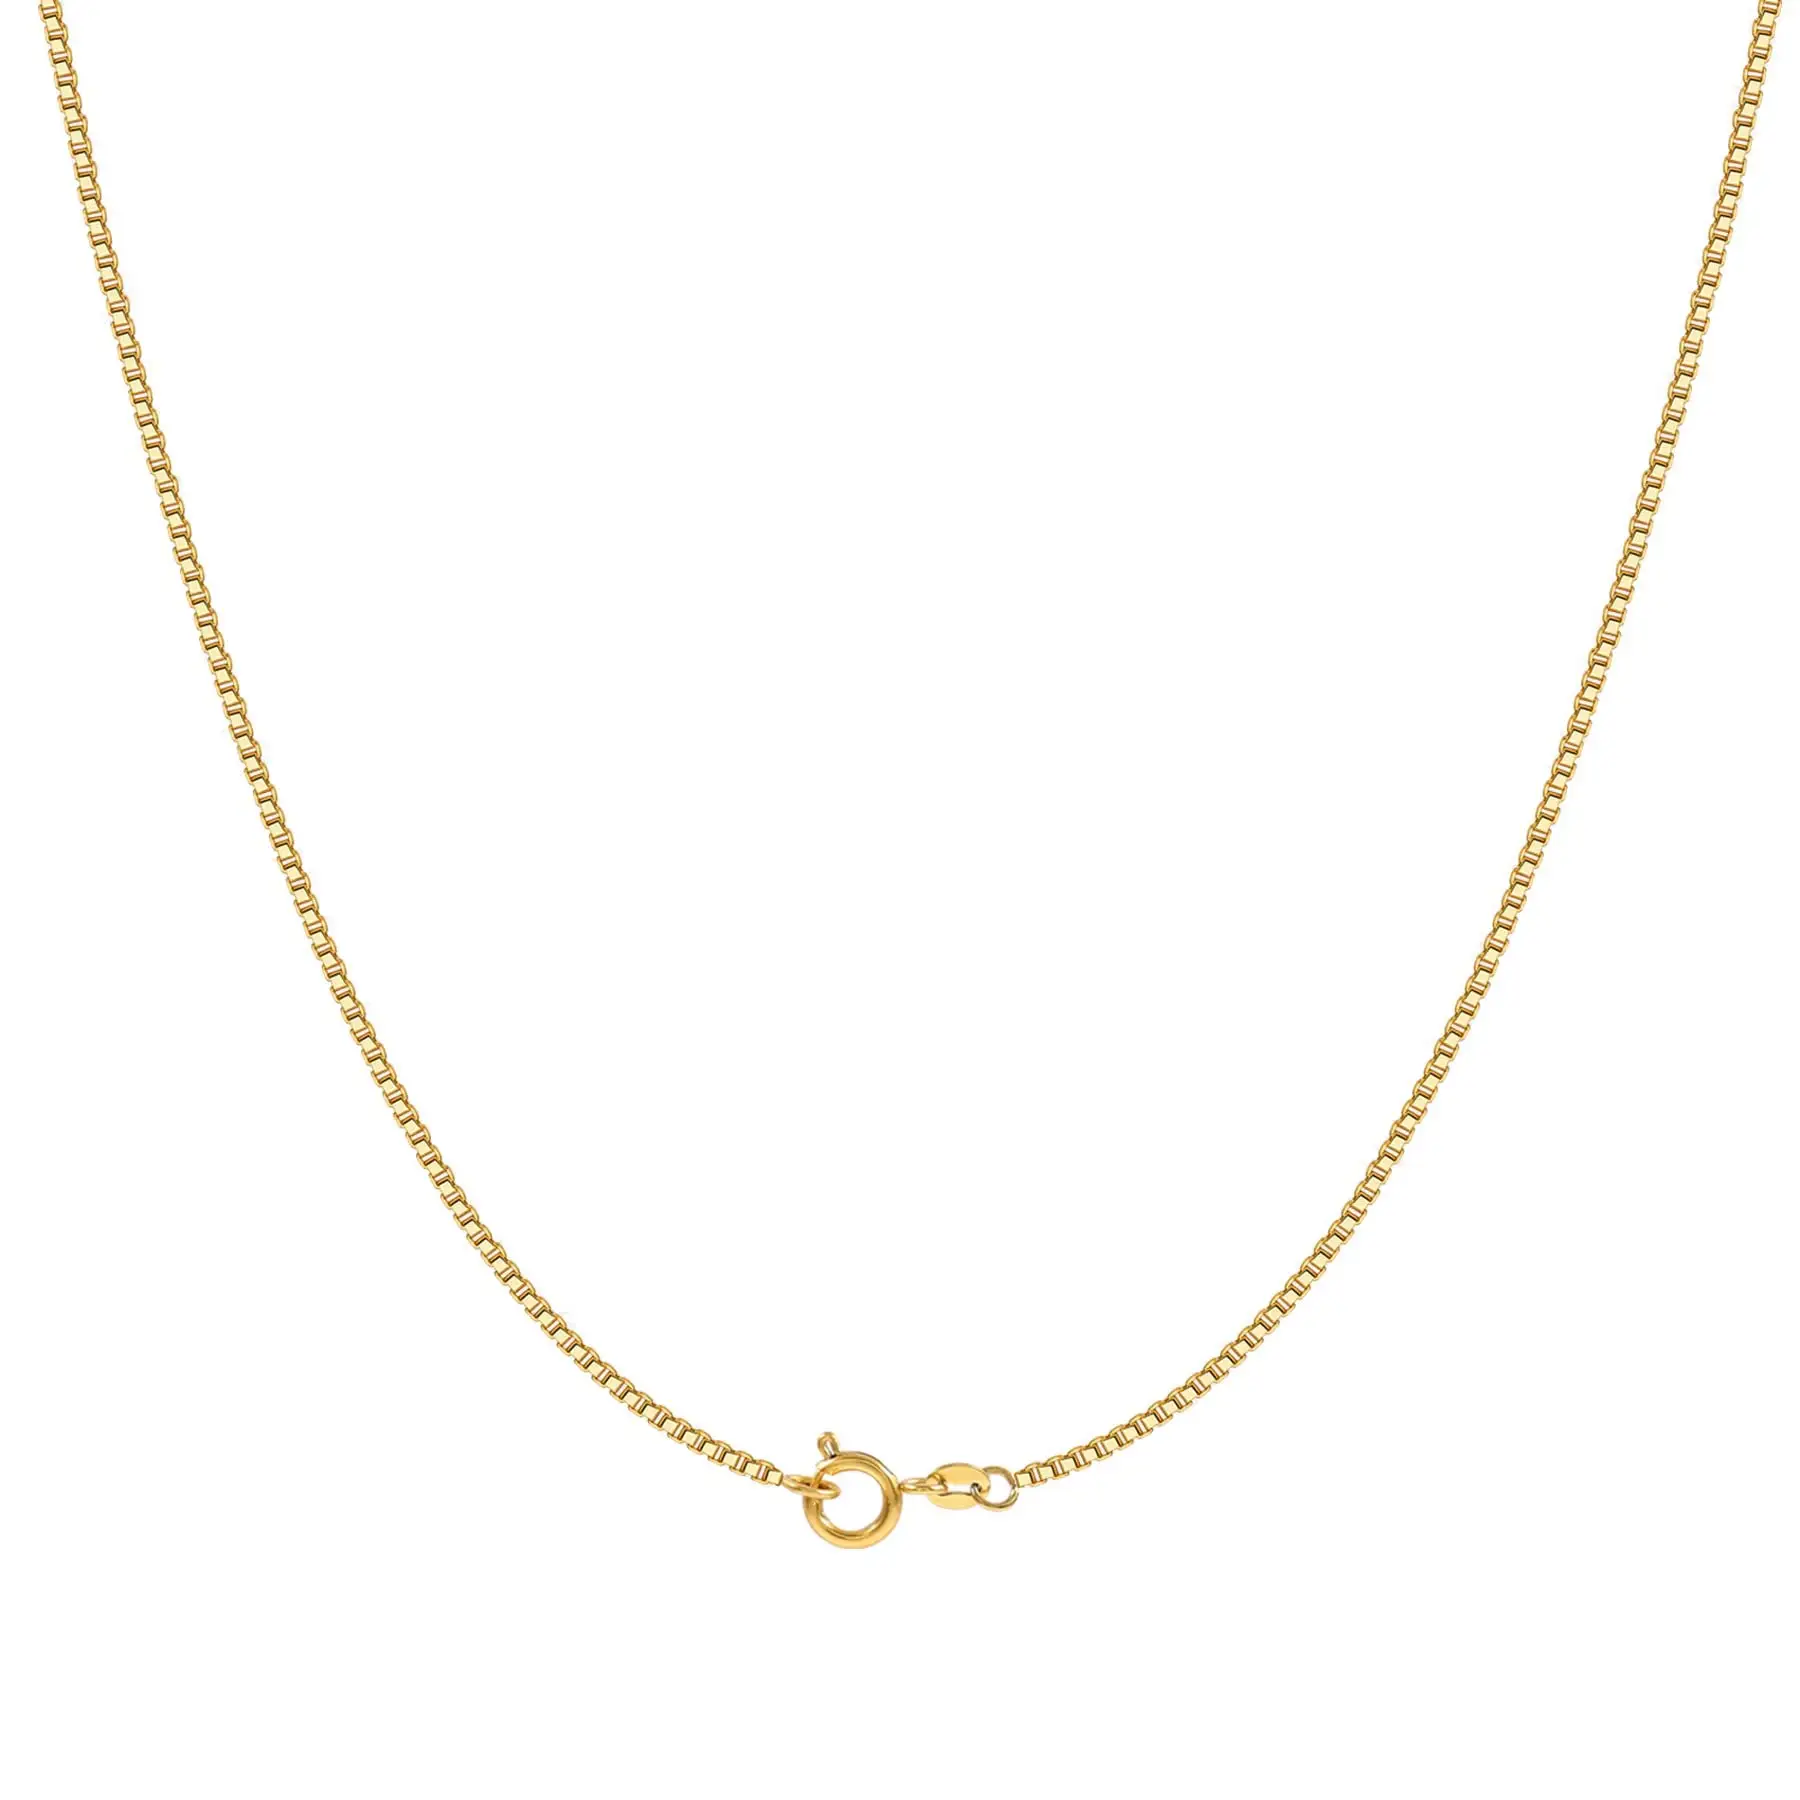 Thin Gold Chain Necklace 1.0mm Width Box Chain Stainless Steel 18K Real Gold Plated Necklace For Women Men